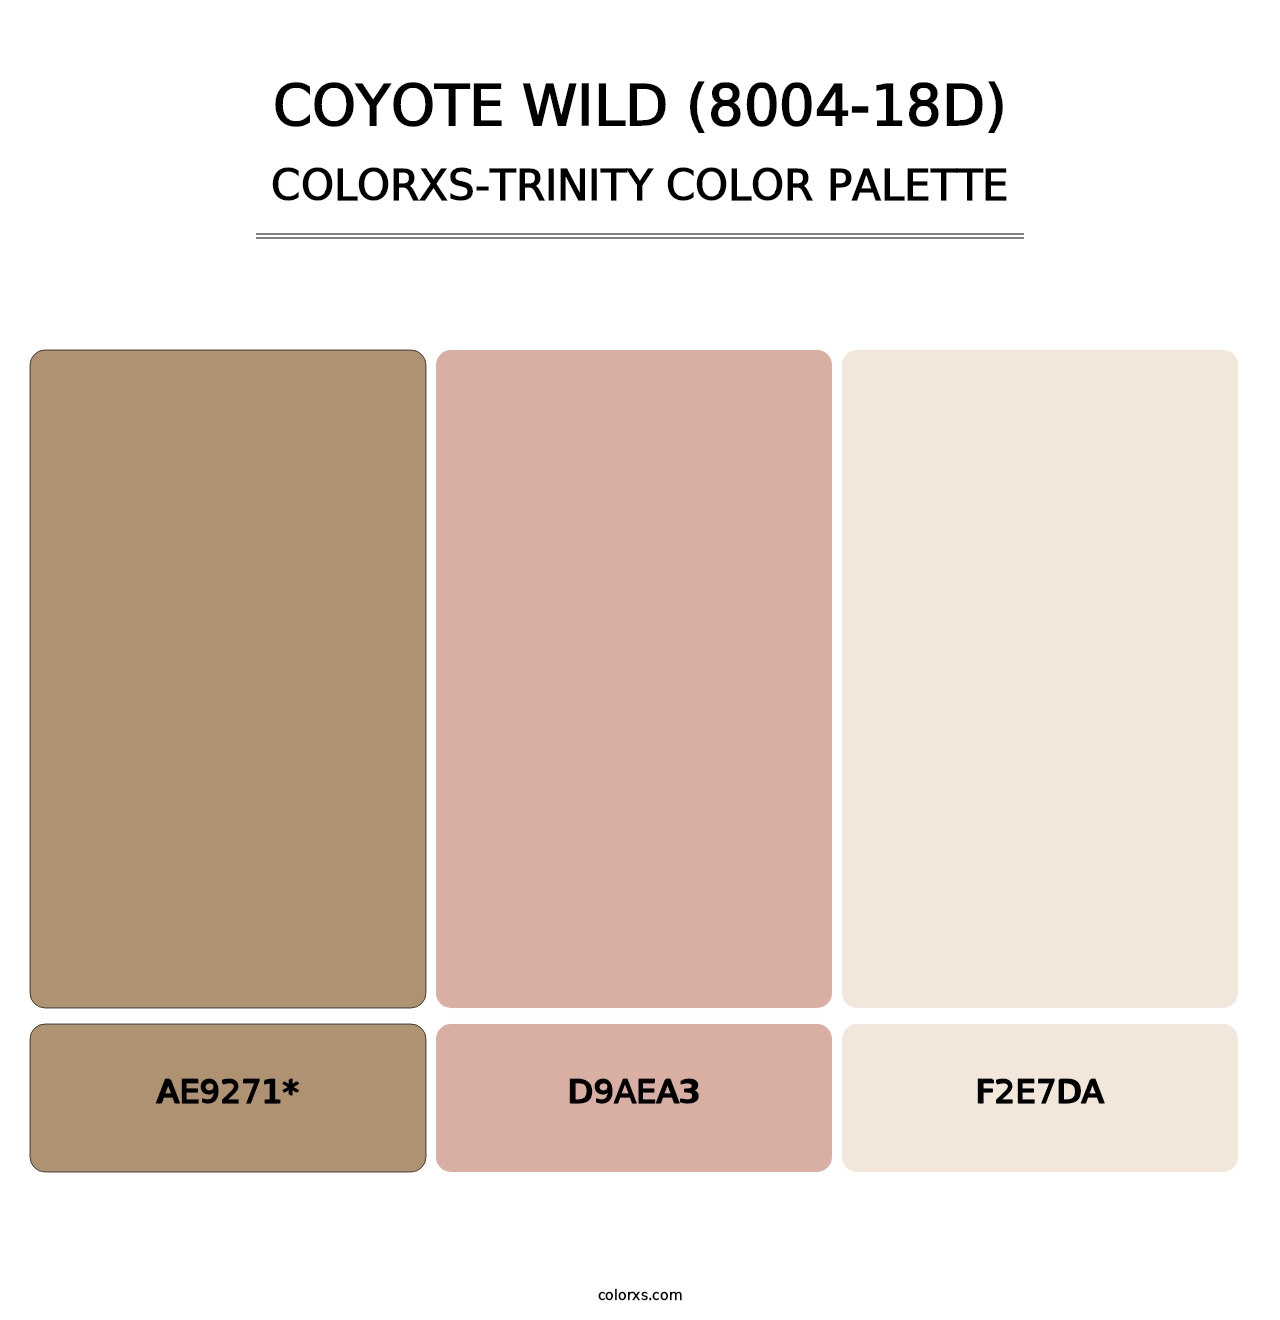 Coyote Wild (8004-18D) - Colorxs Trinity Palette